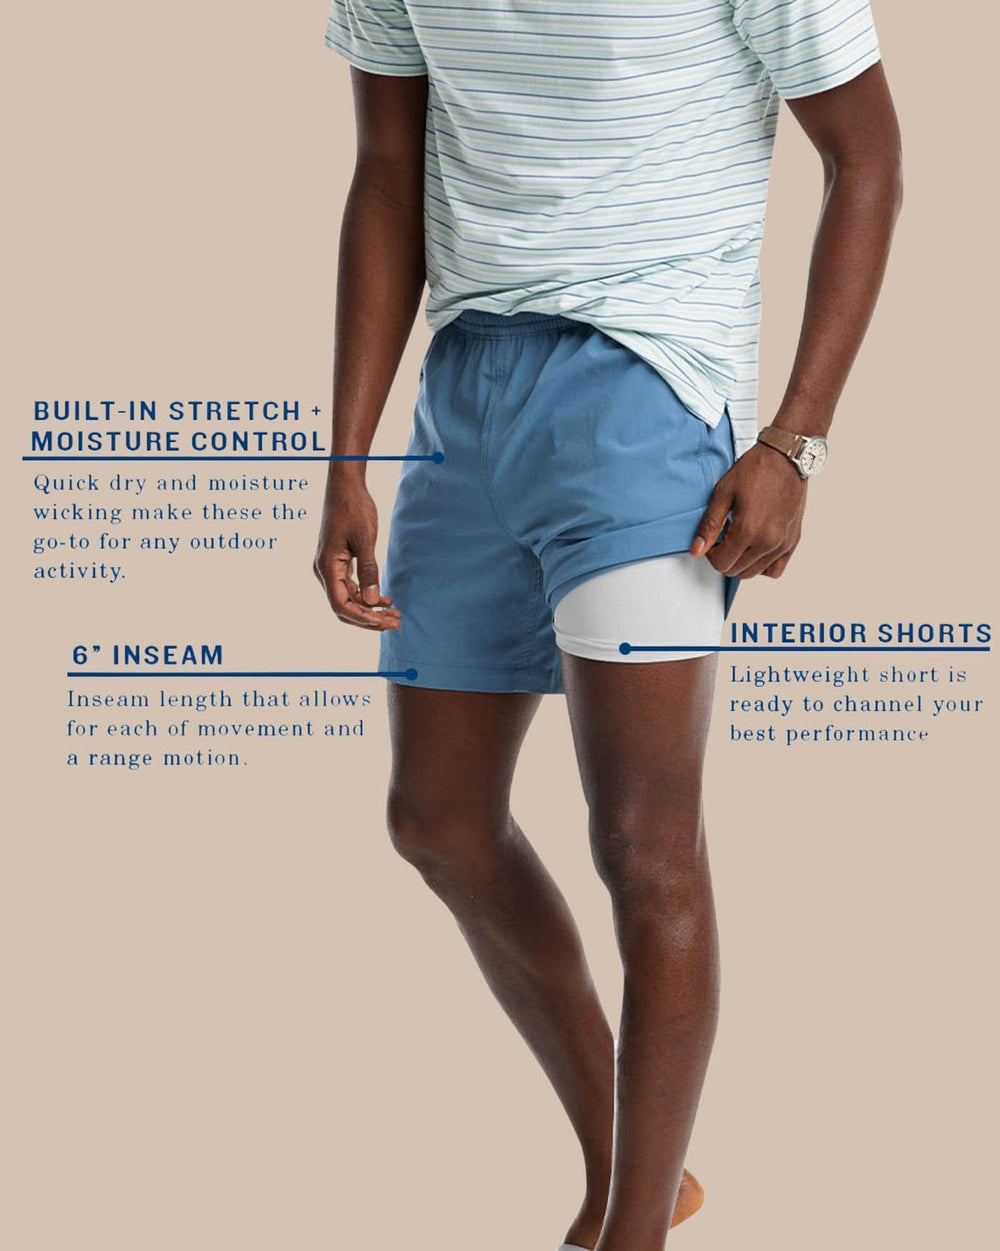 The model highlights short view of the Men's Rip Channel 6 Inch Performance Short by Southern Tide - Blue Ridge